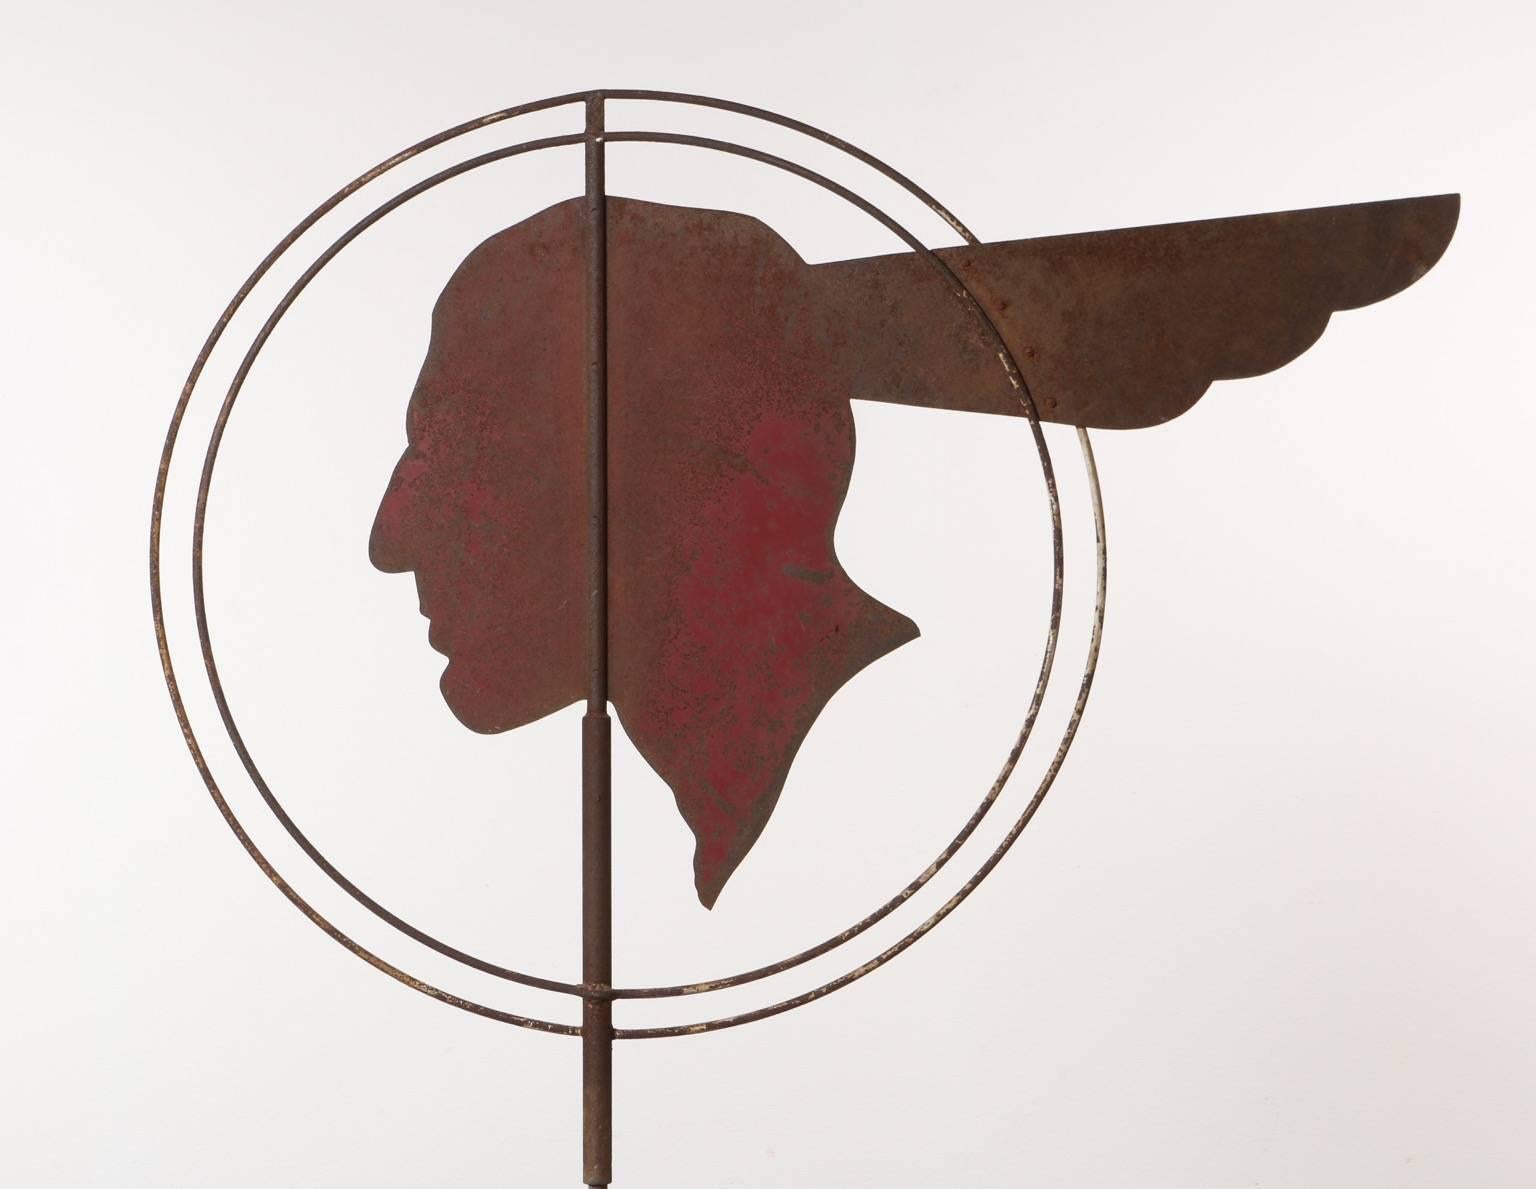 This all original 1930s Pontiac Indian head weathervane once stood atop a Pontiac car dealership roof directing customers to the products below. This weathervane has wonderful natural patina that shows decades of natural outdoor use. The head itself